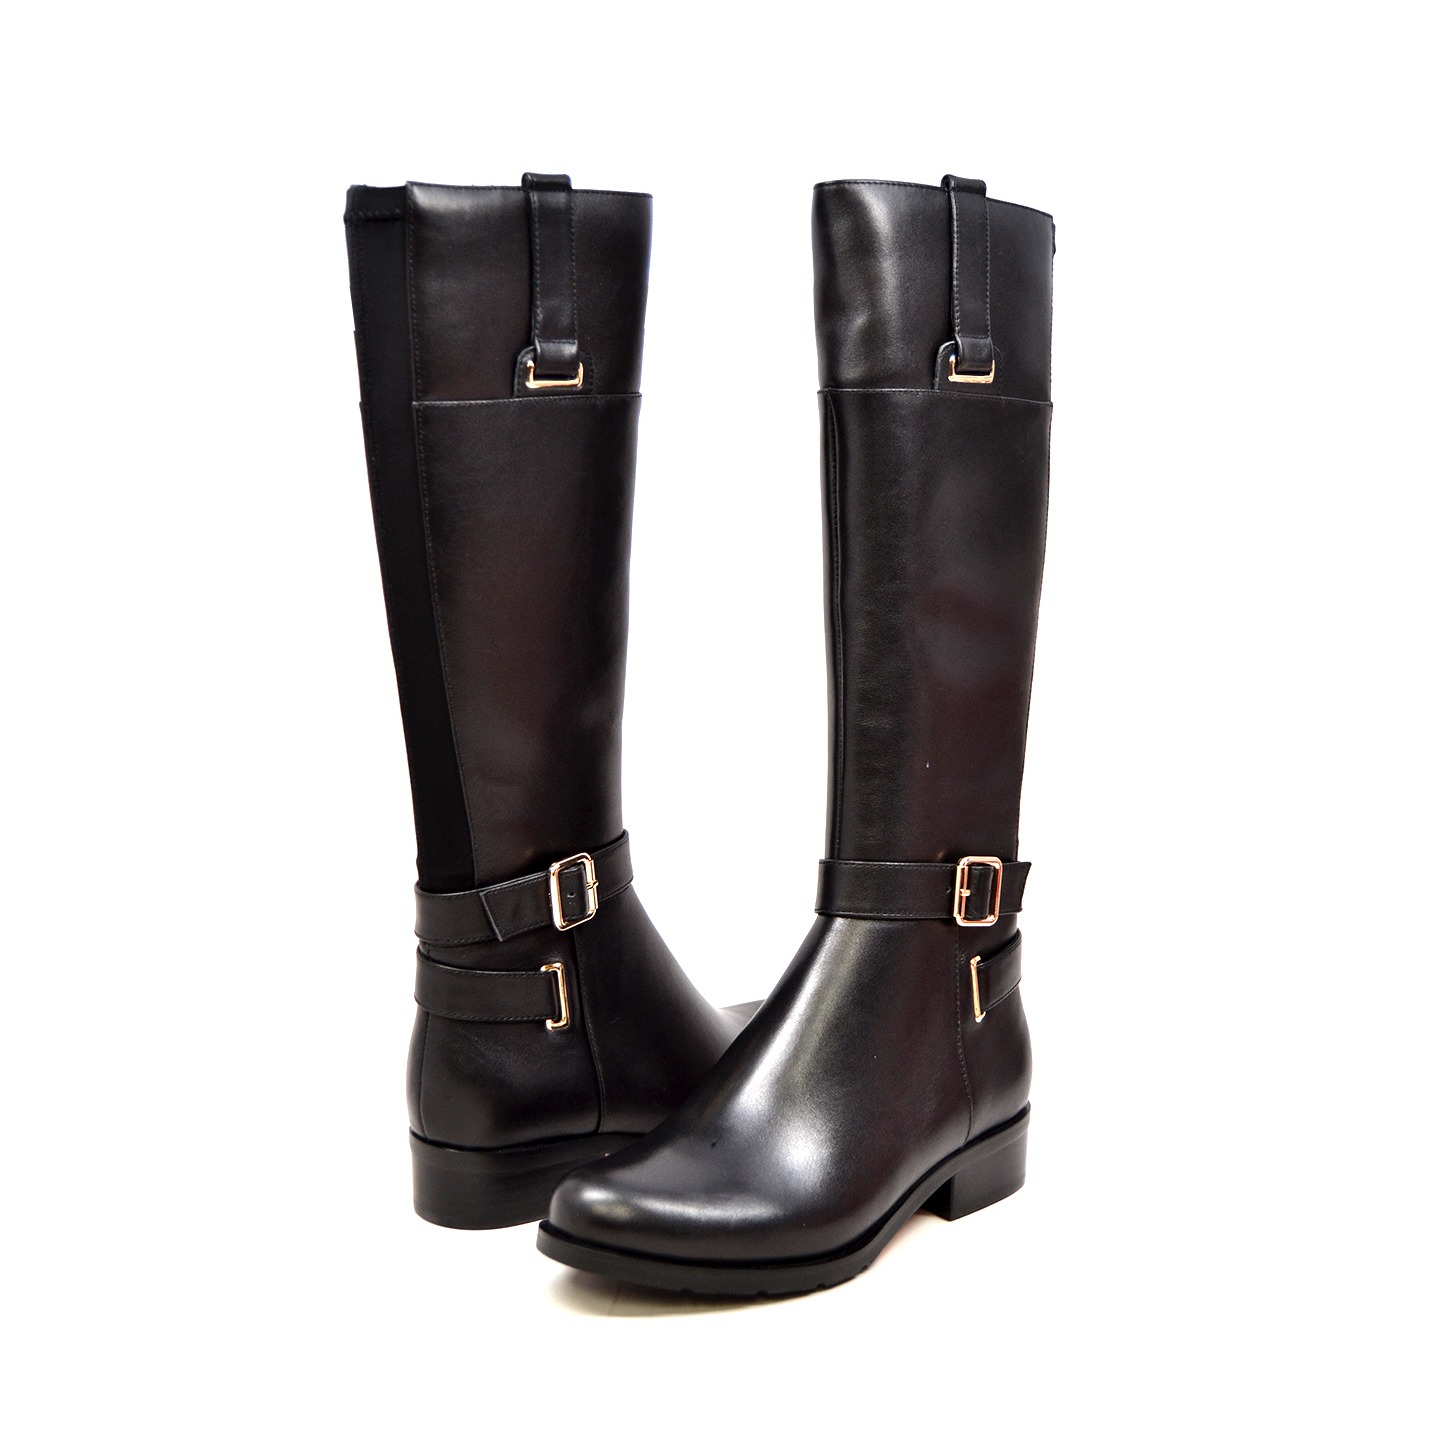 black leather knee high riding boots